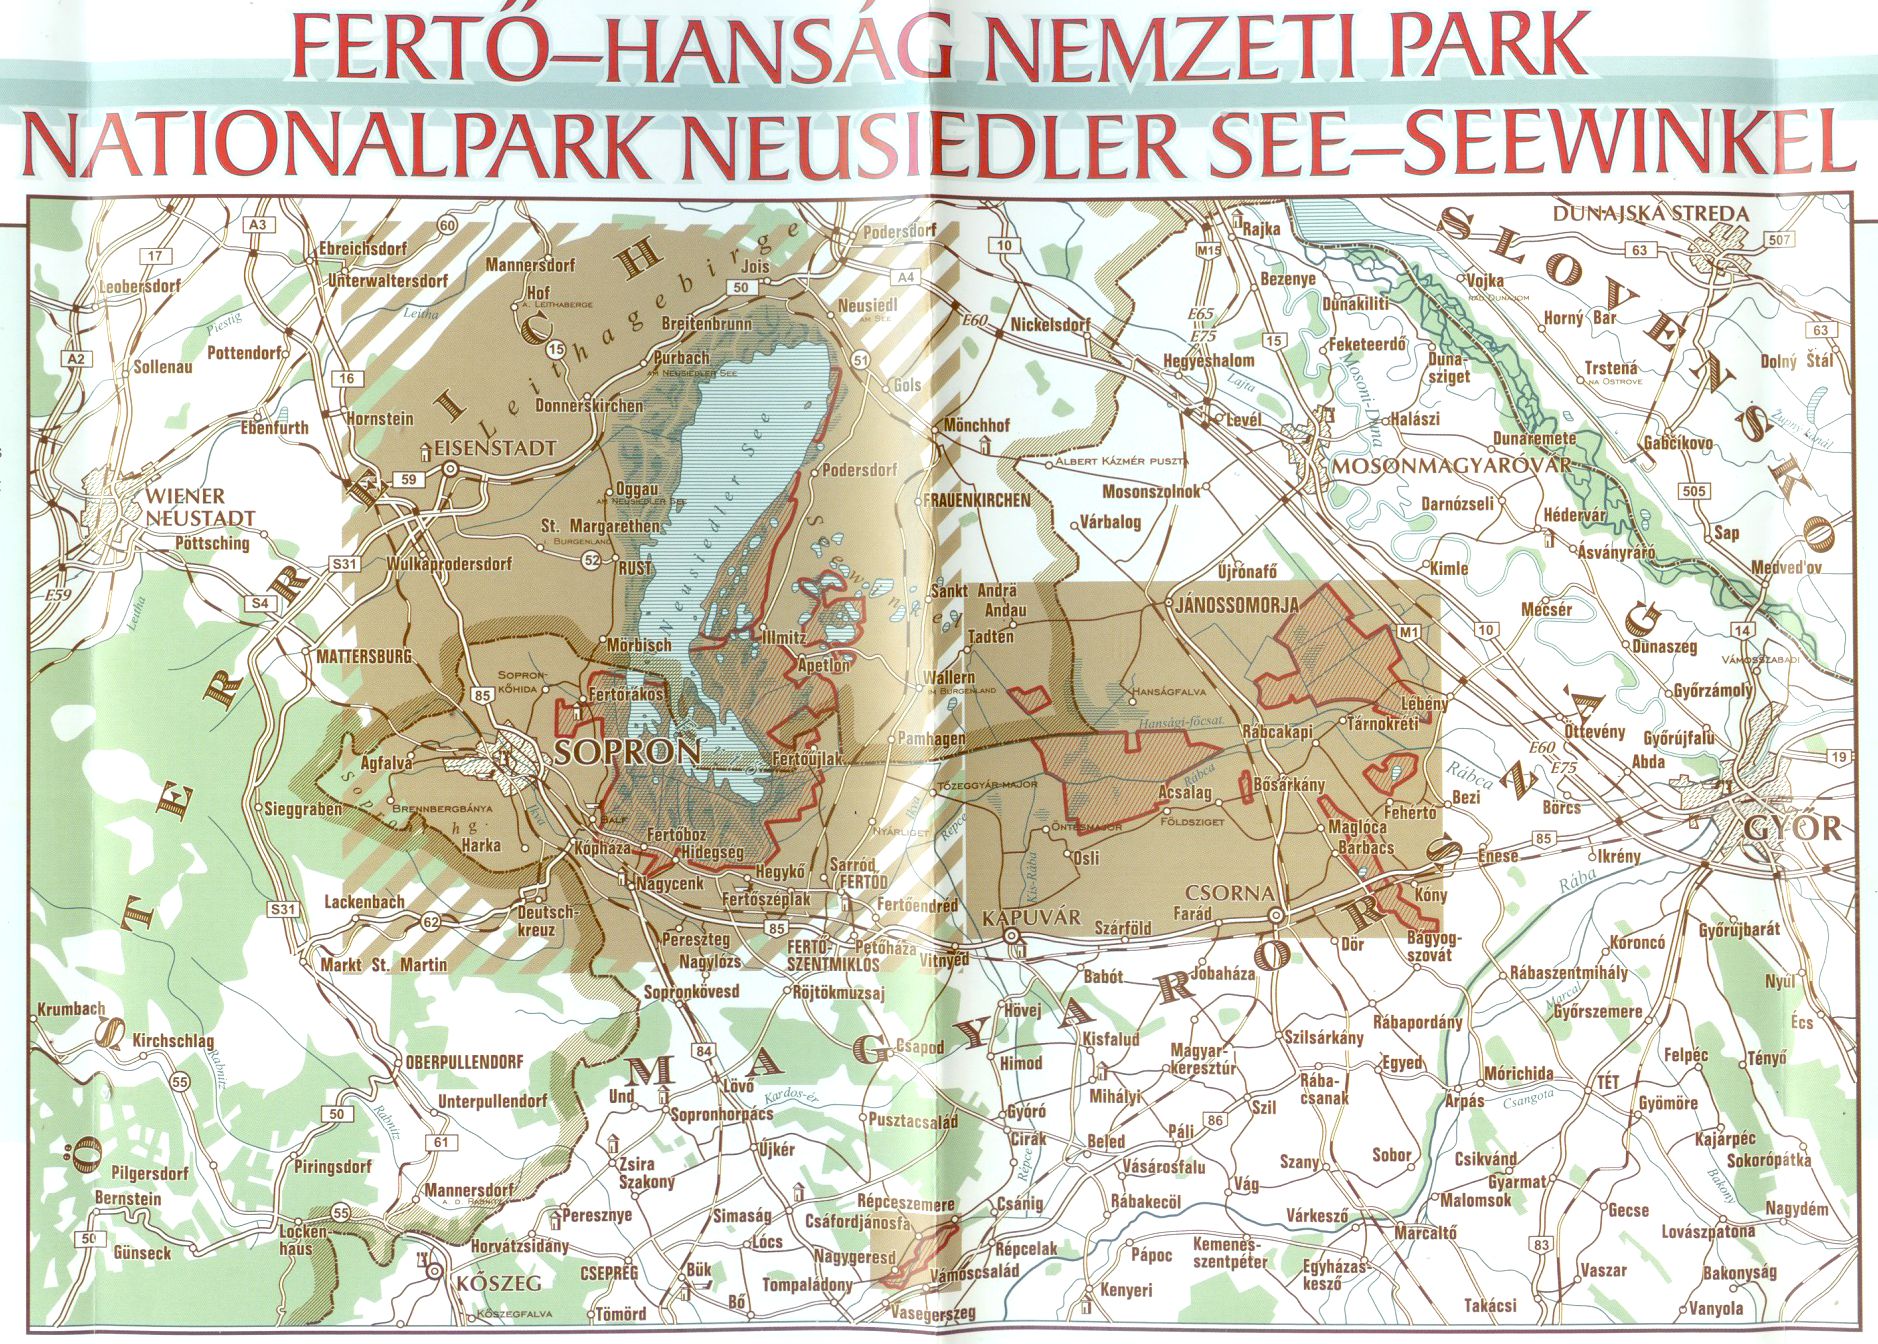 Area covered by the map of the Fertő-Hanság (Neusiedler See-Waasen) NP